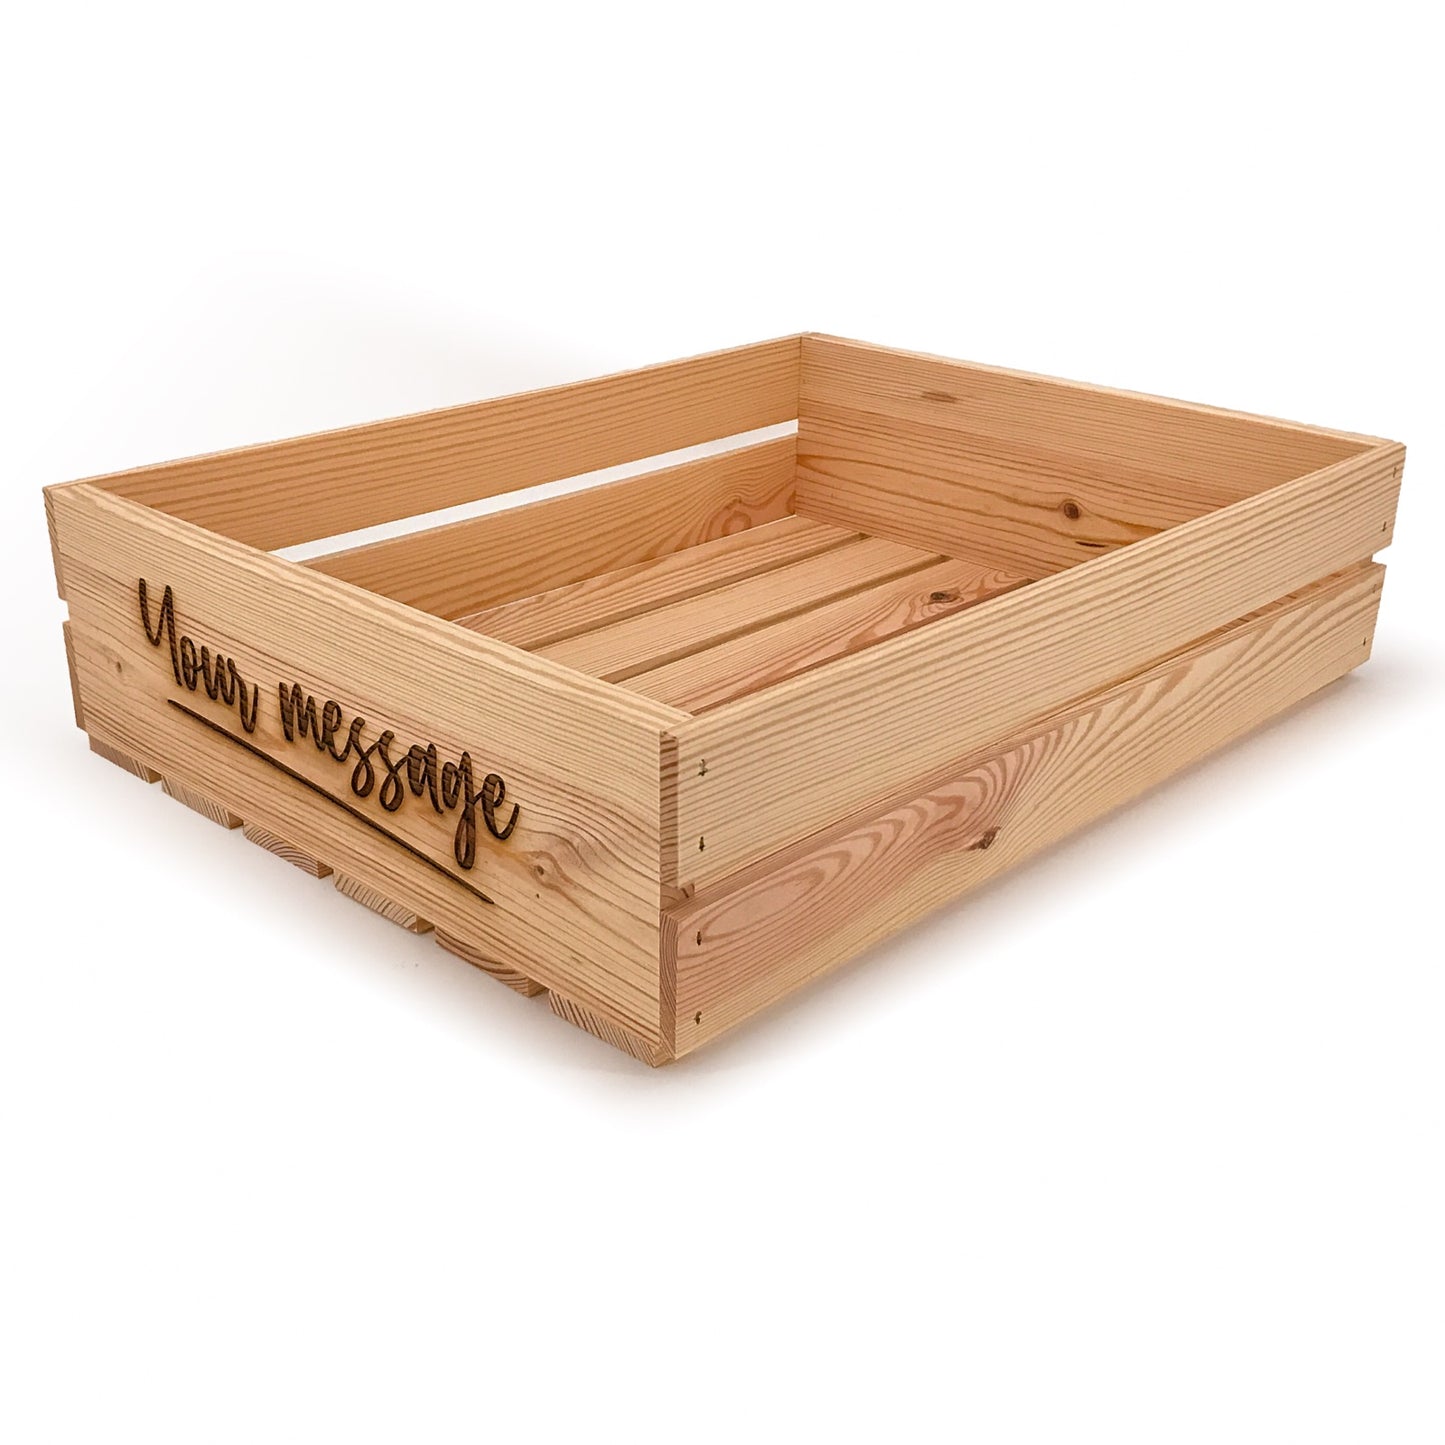 Small wooden crate with custom message 22x17x5.25, 6-WS-22-17-5.25-ST-NW-NL, 12-WS-22-17-5.25-ST-NW-NL, 24-WS-22-17-5.25-ST-NW-NL, 48-WS-22-17-5.25-ST-NW-NL, 96-WS-22-17-5.25-ST-NW-NL